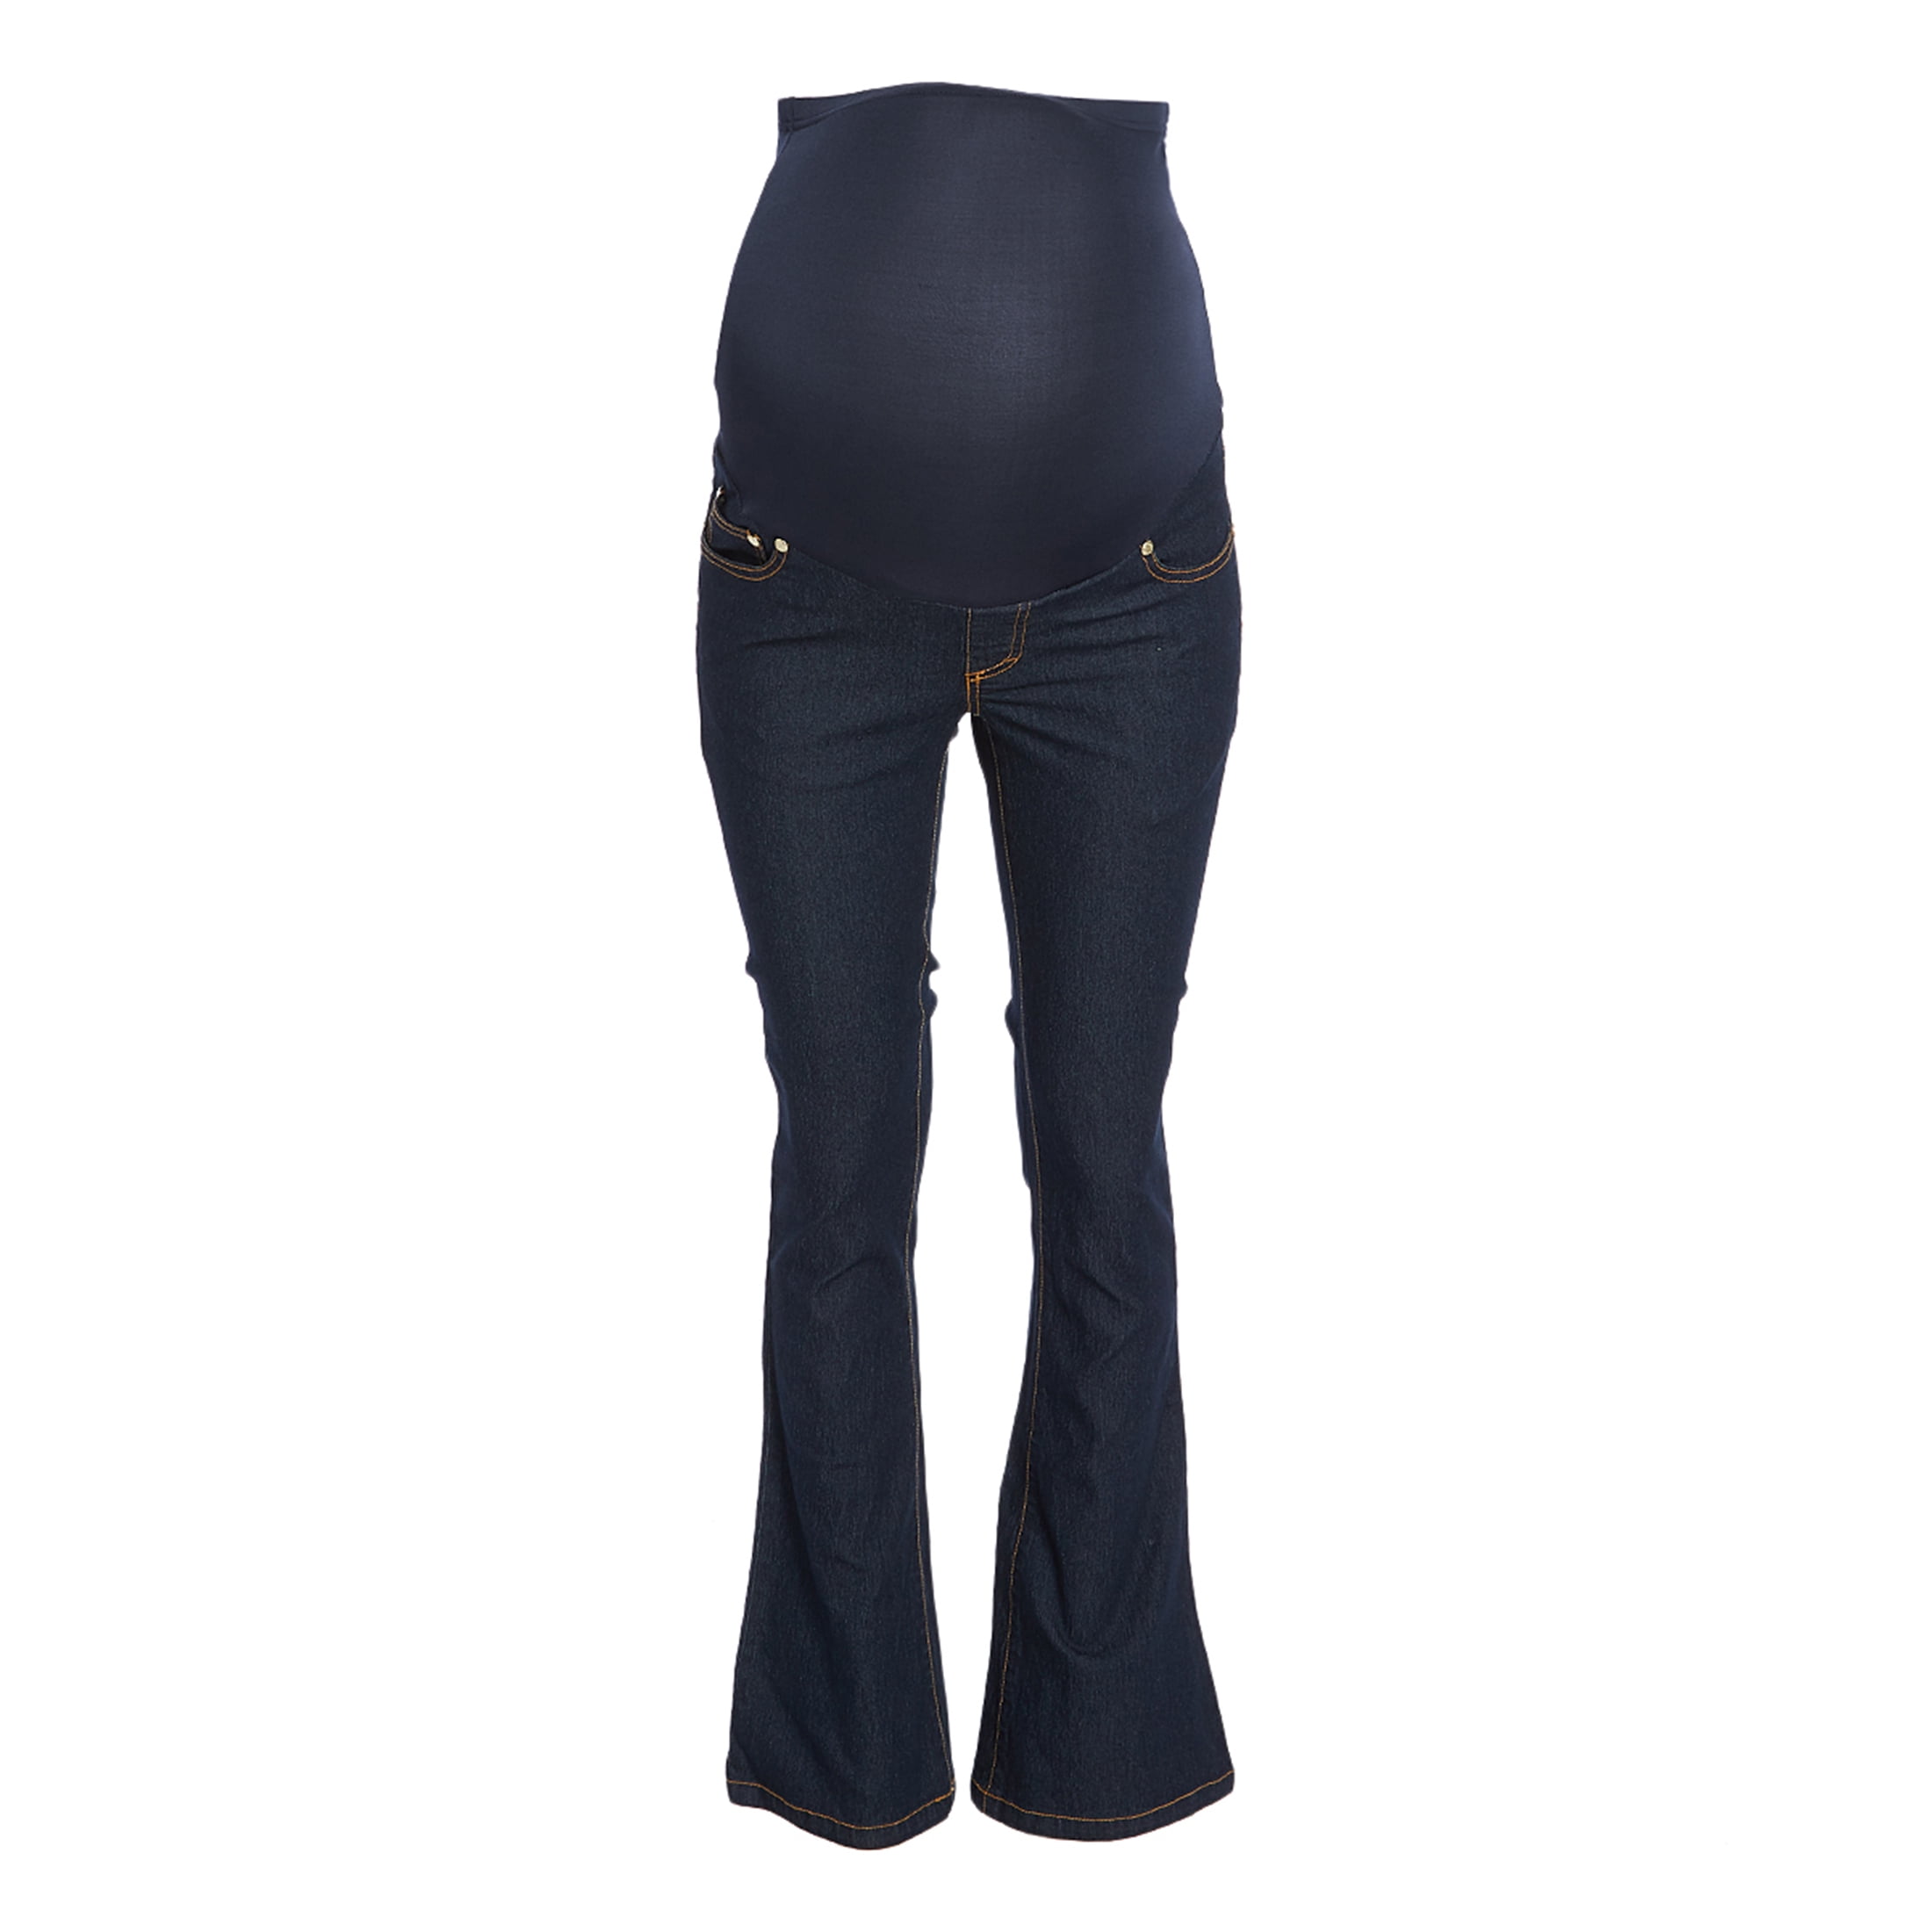 Oh Mamma Fit and Flare leg Overbelly Denim Pant - Walmart.com